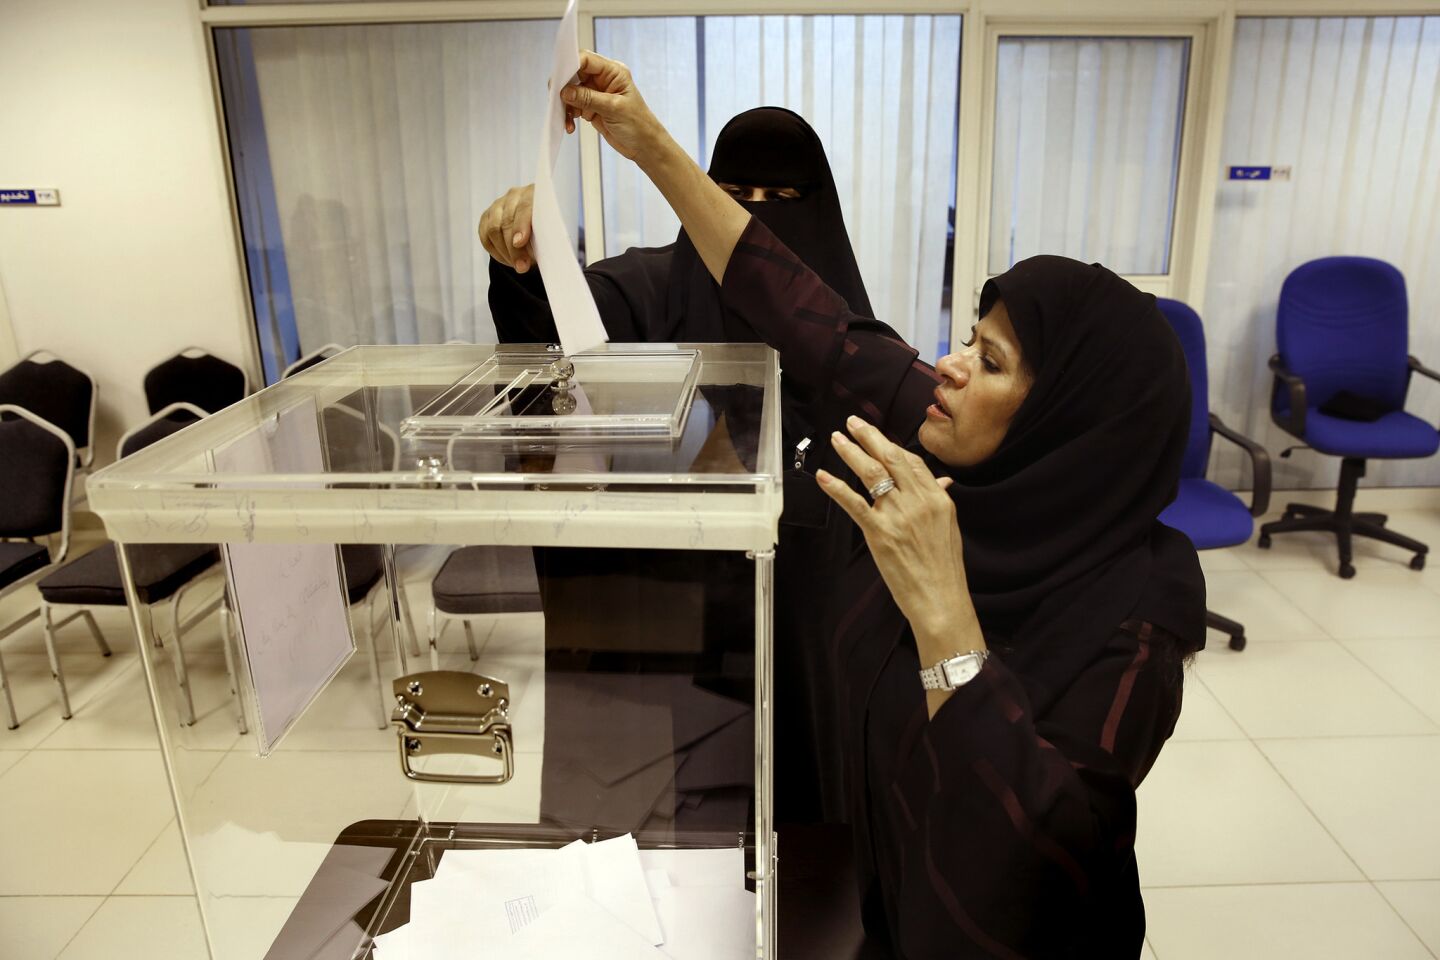 Noura Alghanem, right, votes for the first time in her life, at the age of 59. "It's historic for Saudi women," she said. "It's important for women to do their part in society."